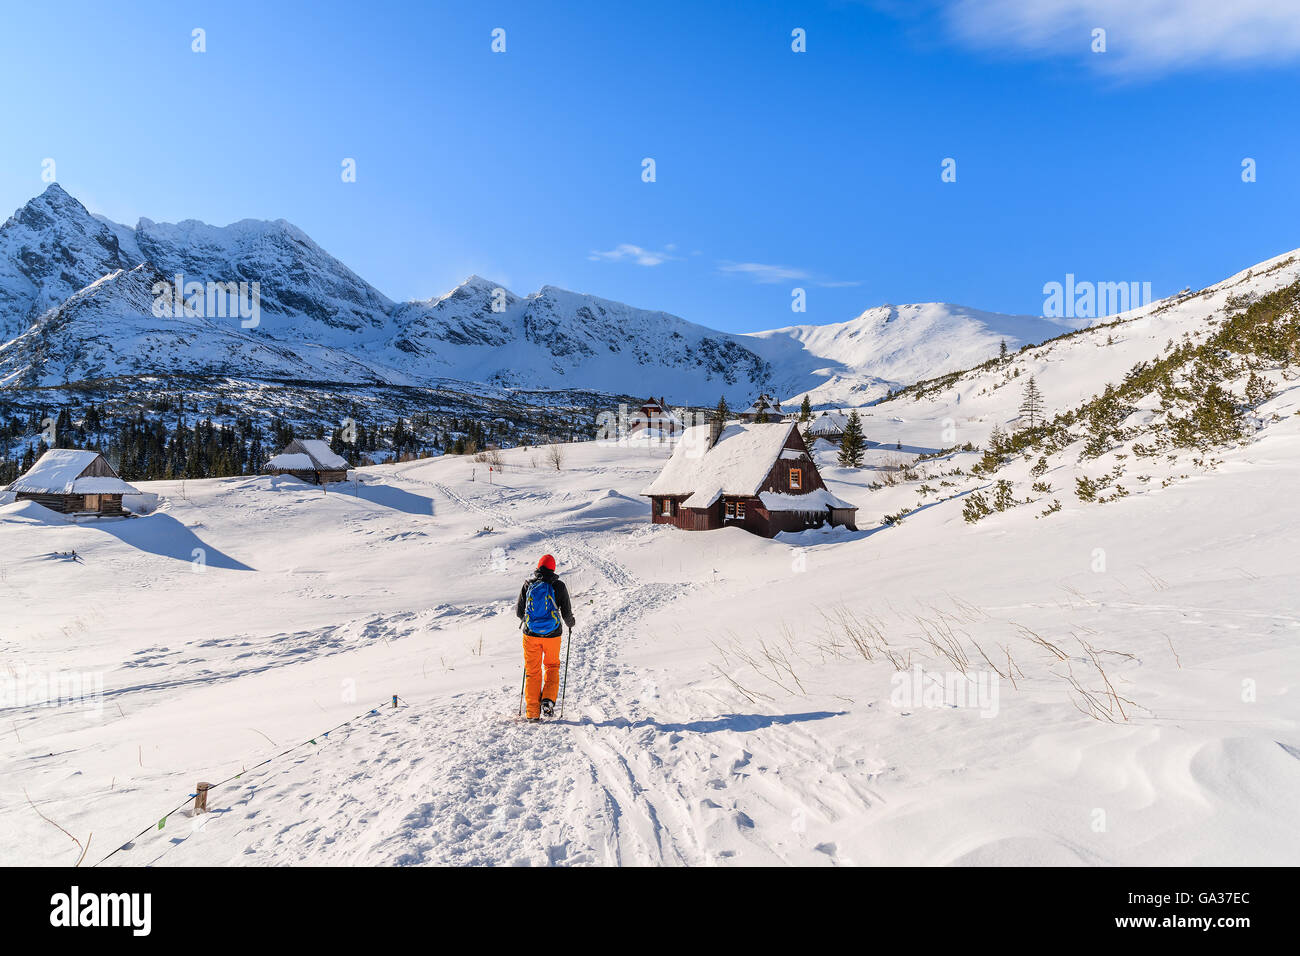 Young woman backpacker tourist walking to mountain huts in winter landscape of Gasienicowa valley, Tatra Mountains, Poland Stock Photo